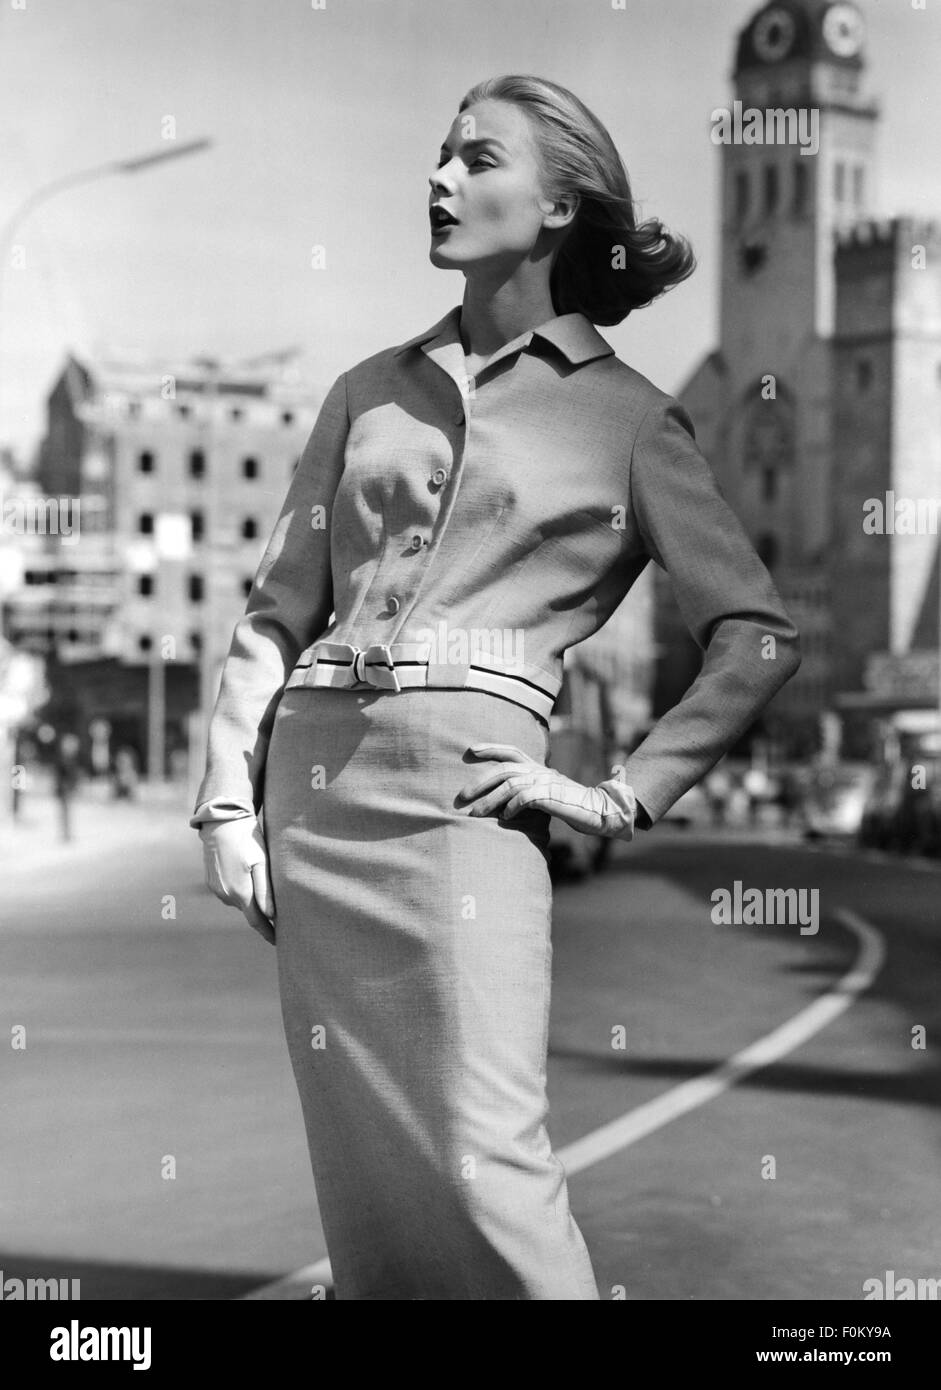 Mode, 50er Jahre, Damenmode, Frau im Anzug designed by Rainer Wolf,  München, 50er Jahre, Additional-Rights-Clearences-not available  Stockfotografie - Alamy